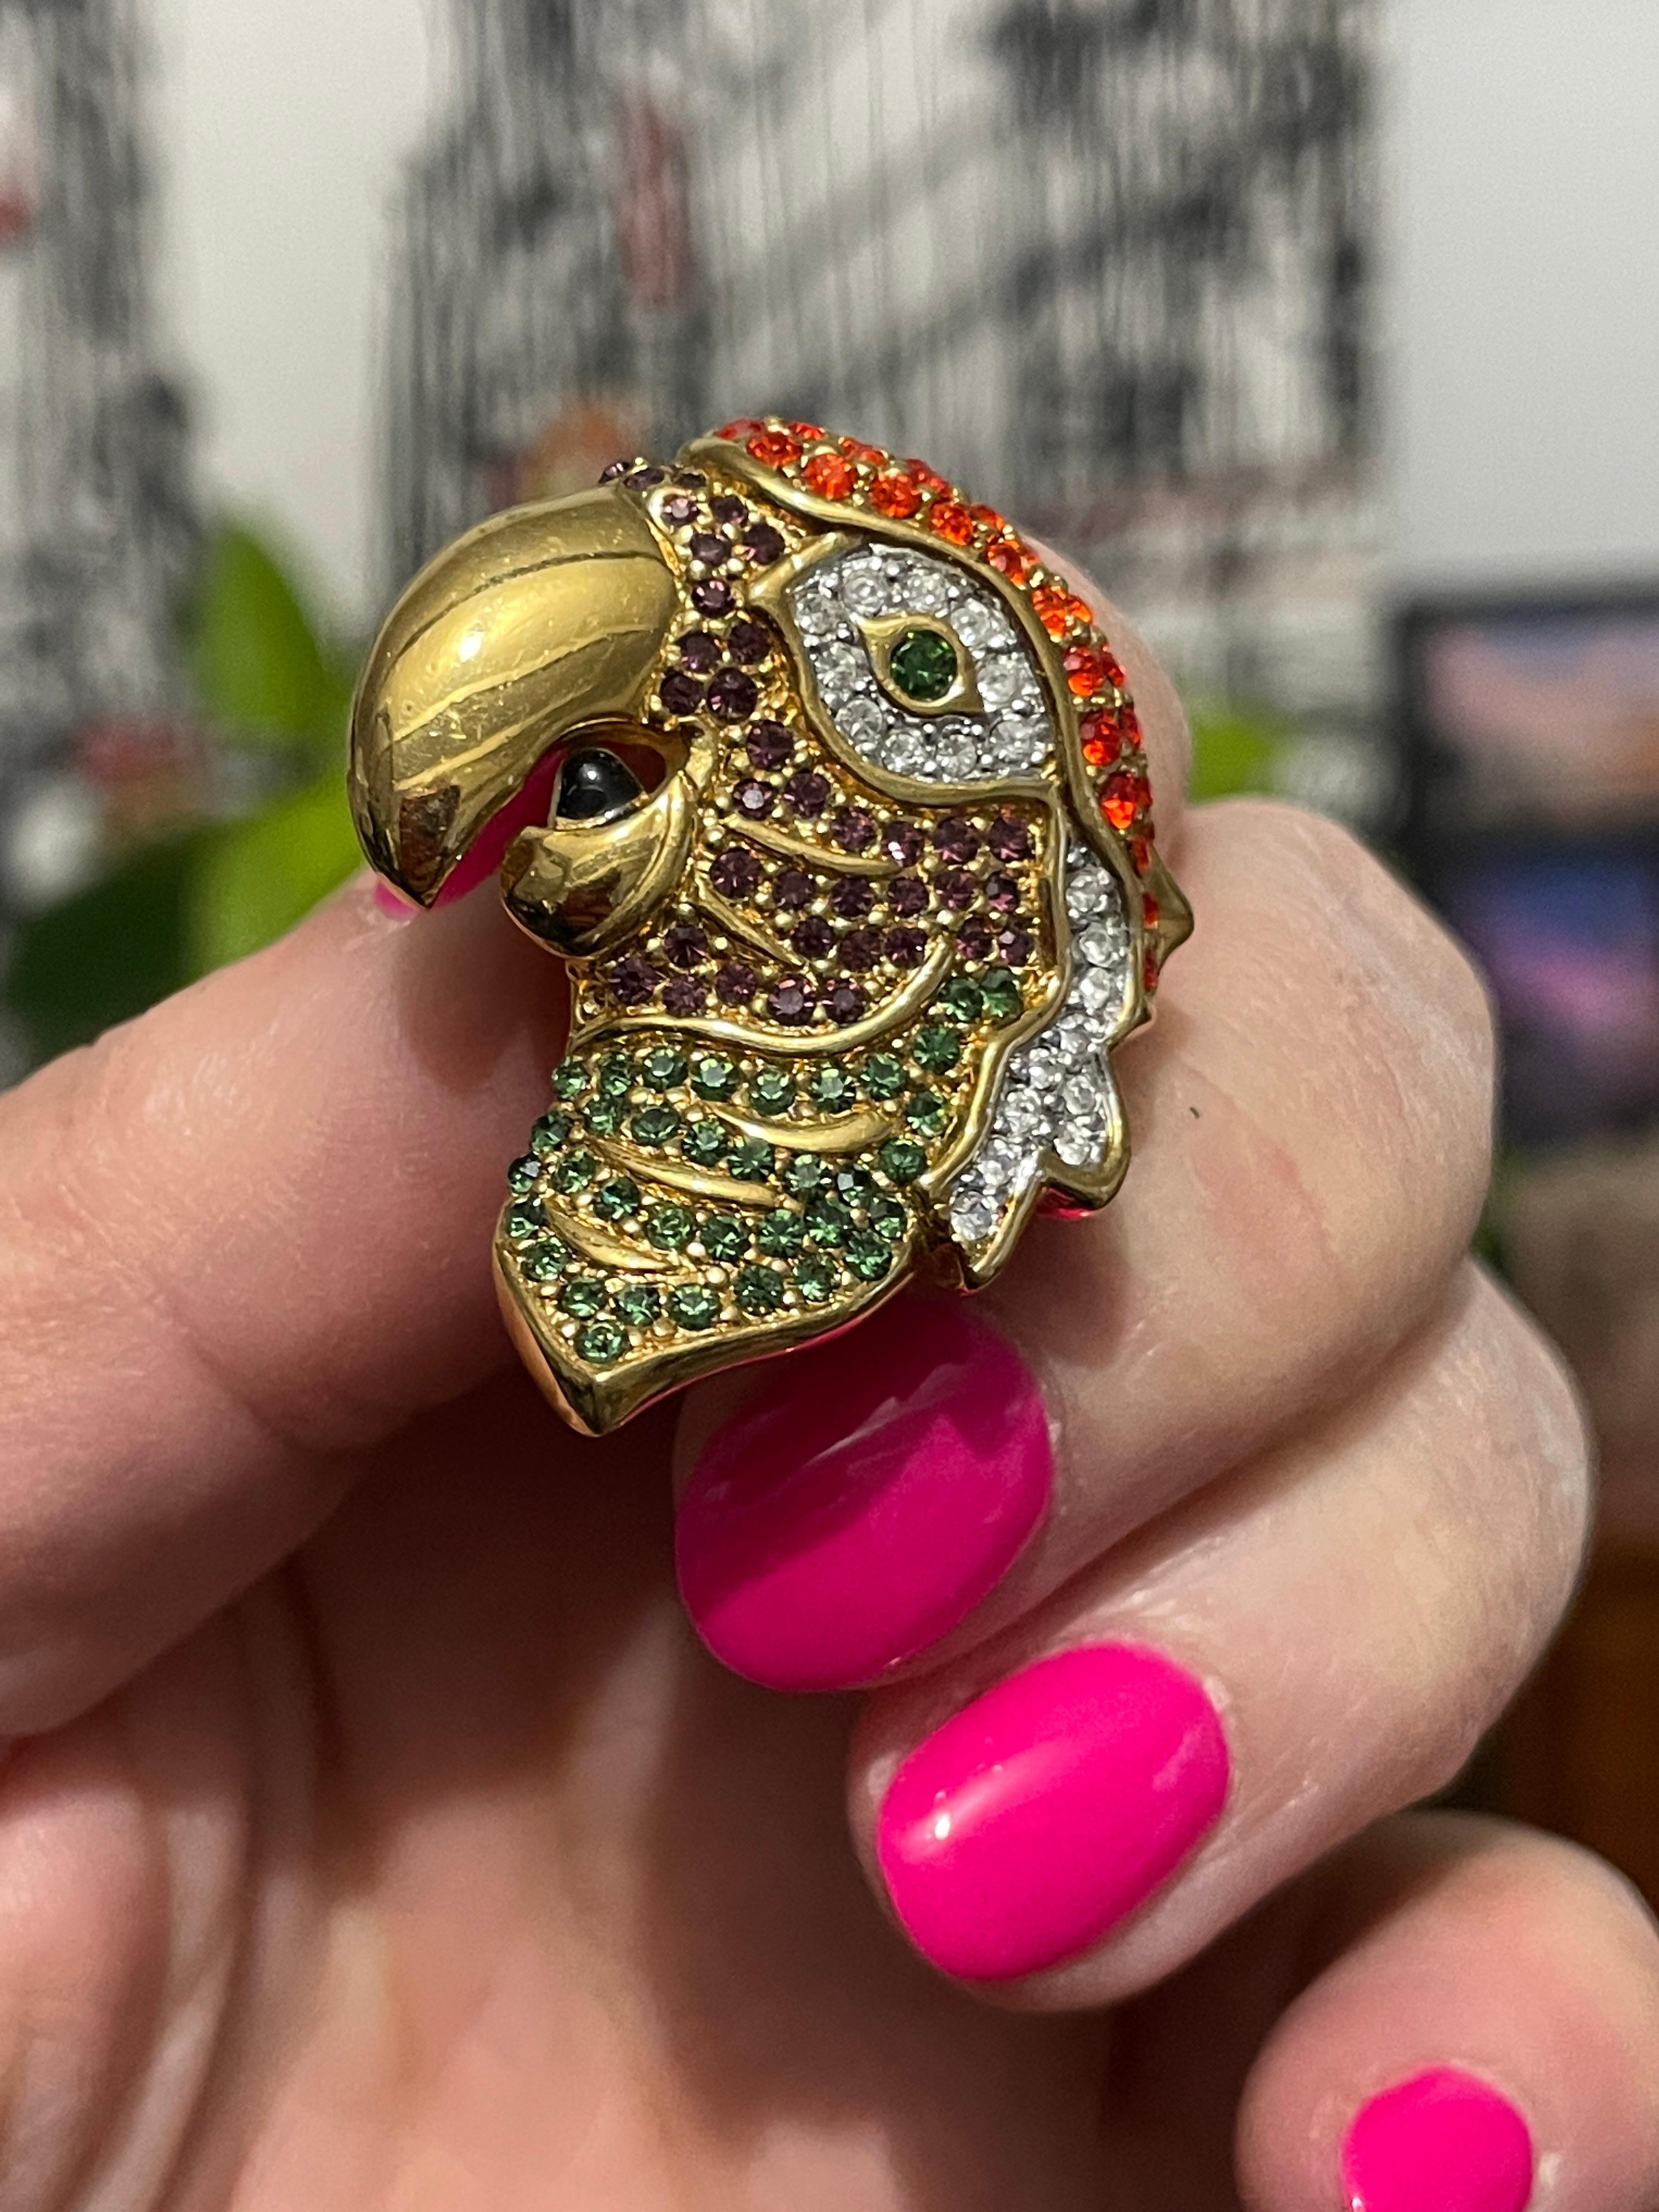 Stunning Parrot Brooch by Swarovski Brooch with Purple, Red, Green and clear Crystals. Measures 1.45 inches x 1.21 inches. More Swarovski listed on our storefront. This is out of a massive collection of Jewelry from one collector. This collection